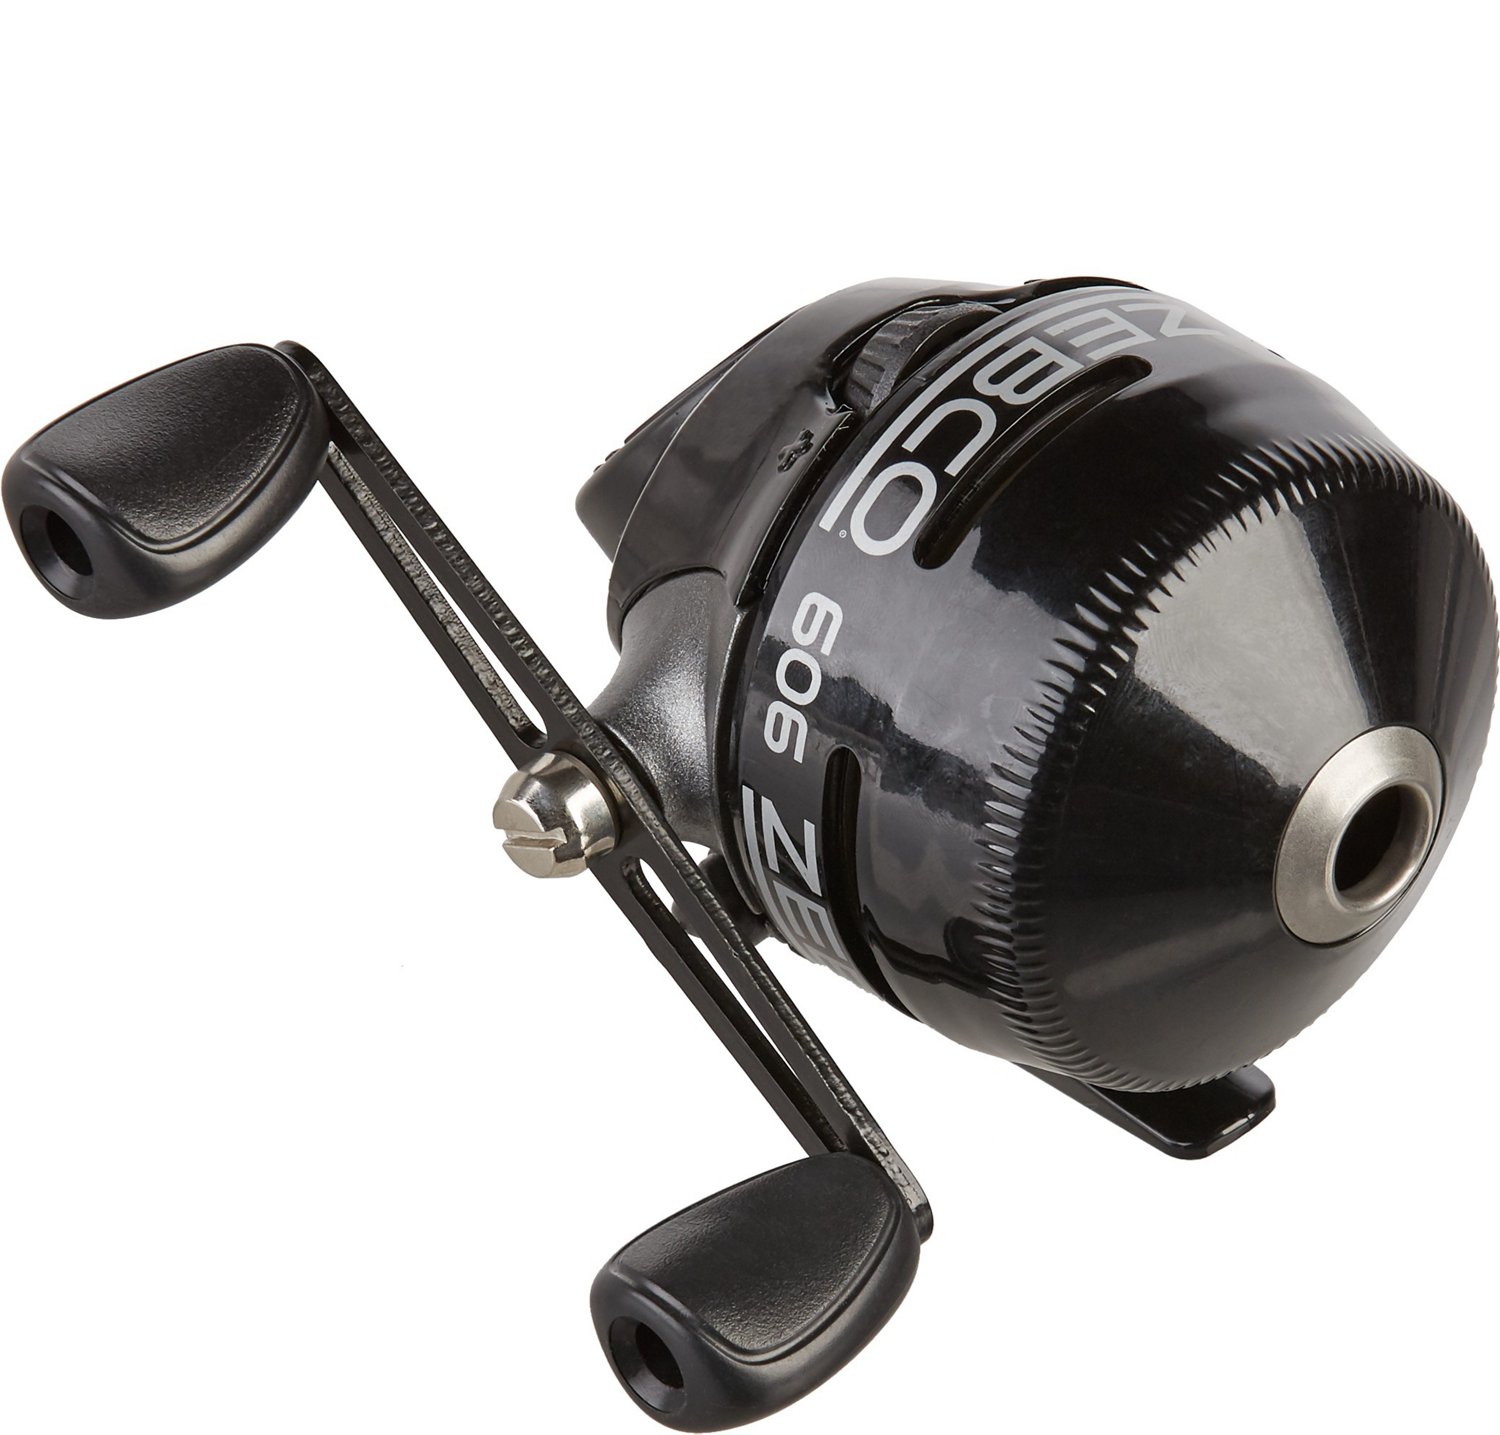 5 Types of Fishing Reels to Catch More Fish